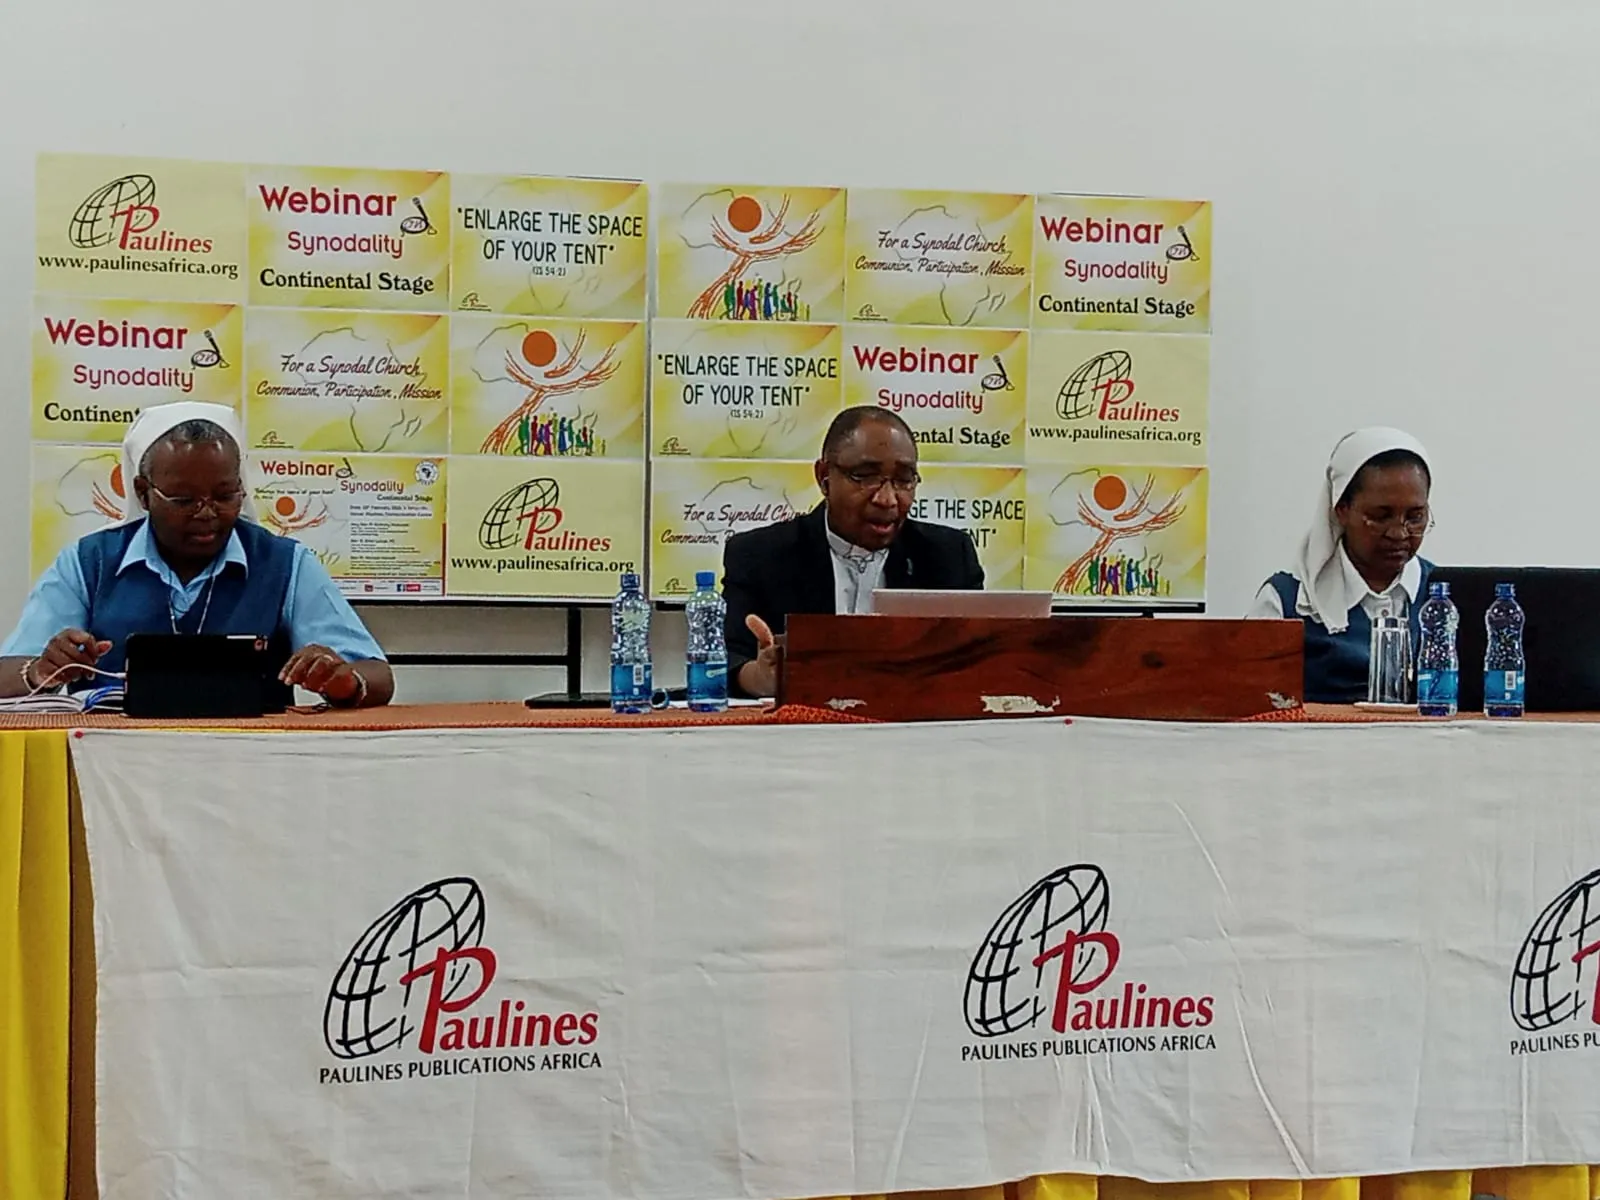 Panelists during the February 25 webinar of the Continental Stage of the Synod on Synodality. Credit: Paulines Publication Africa